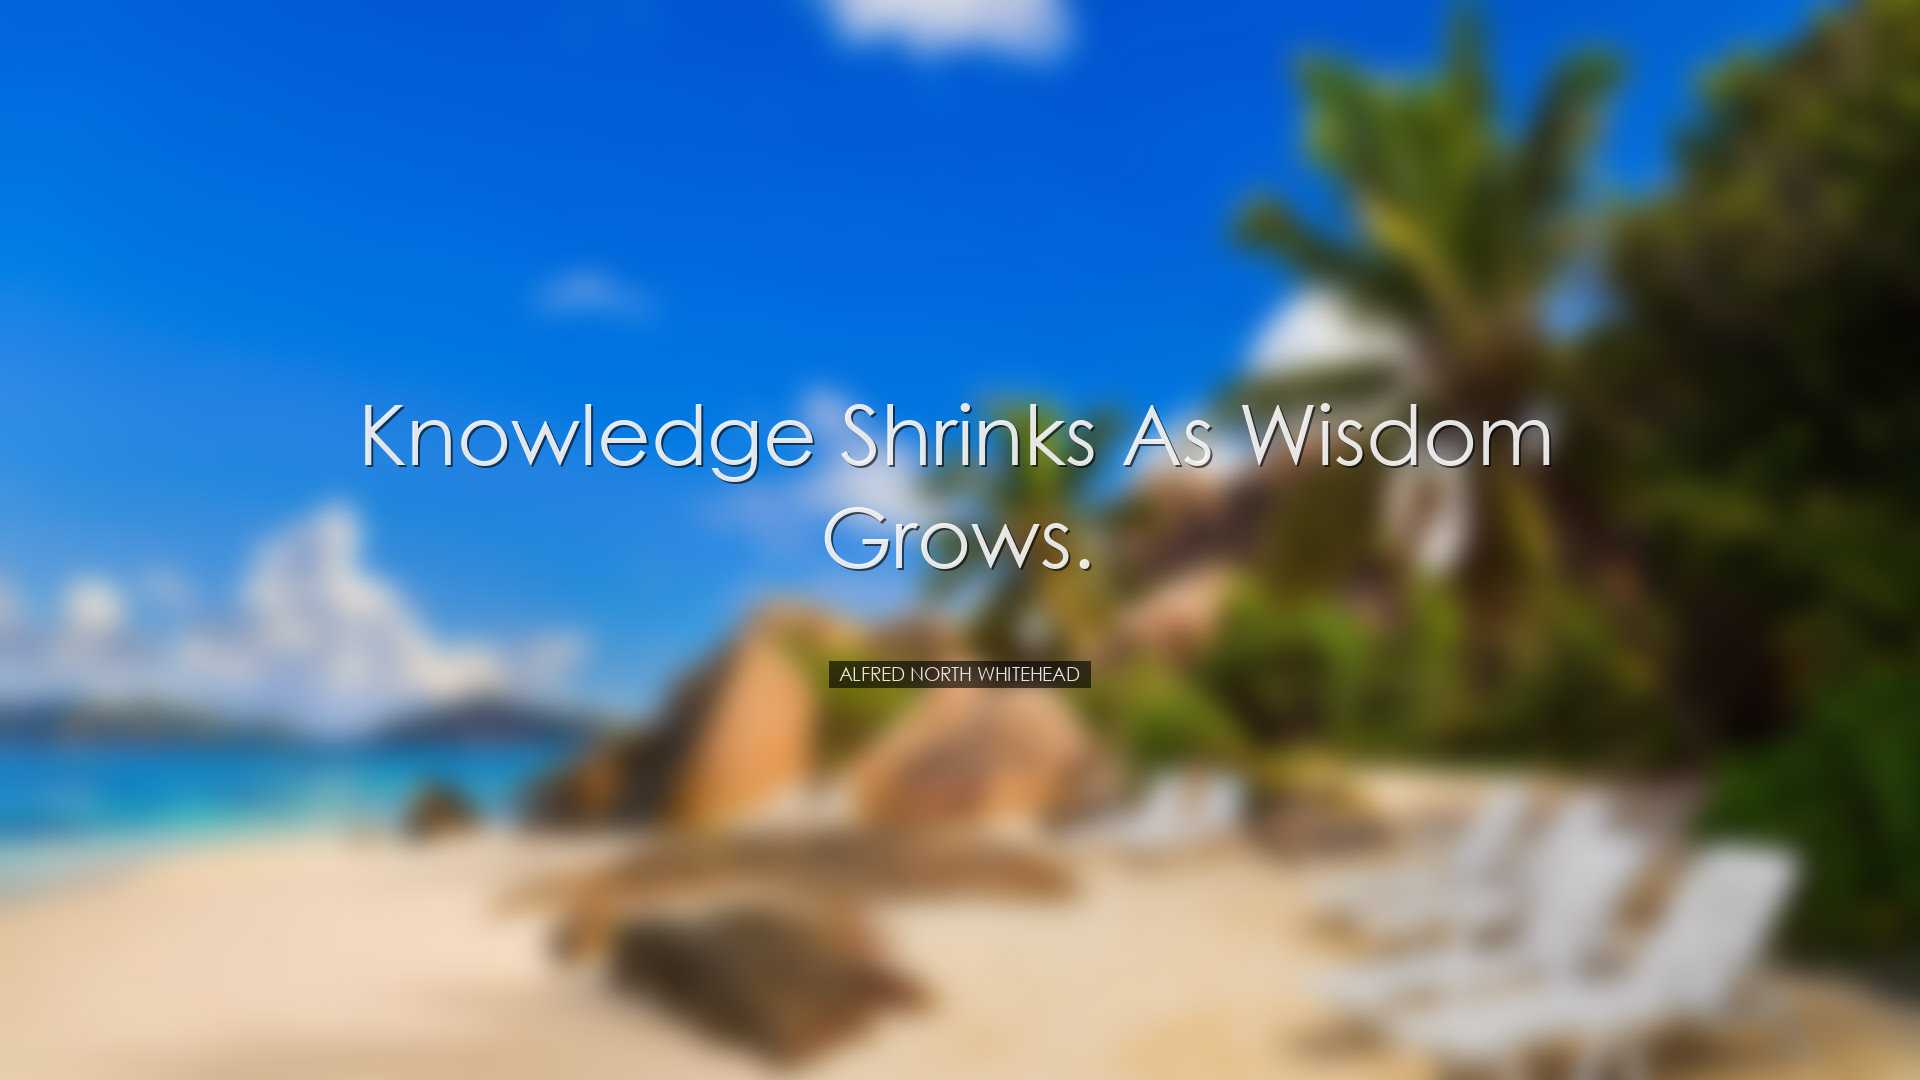 Knowledge shrinks as wisdom grows. - Alfred North Whitehead